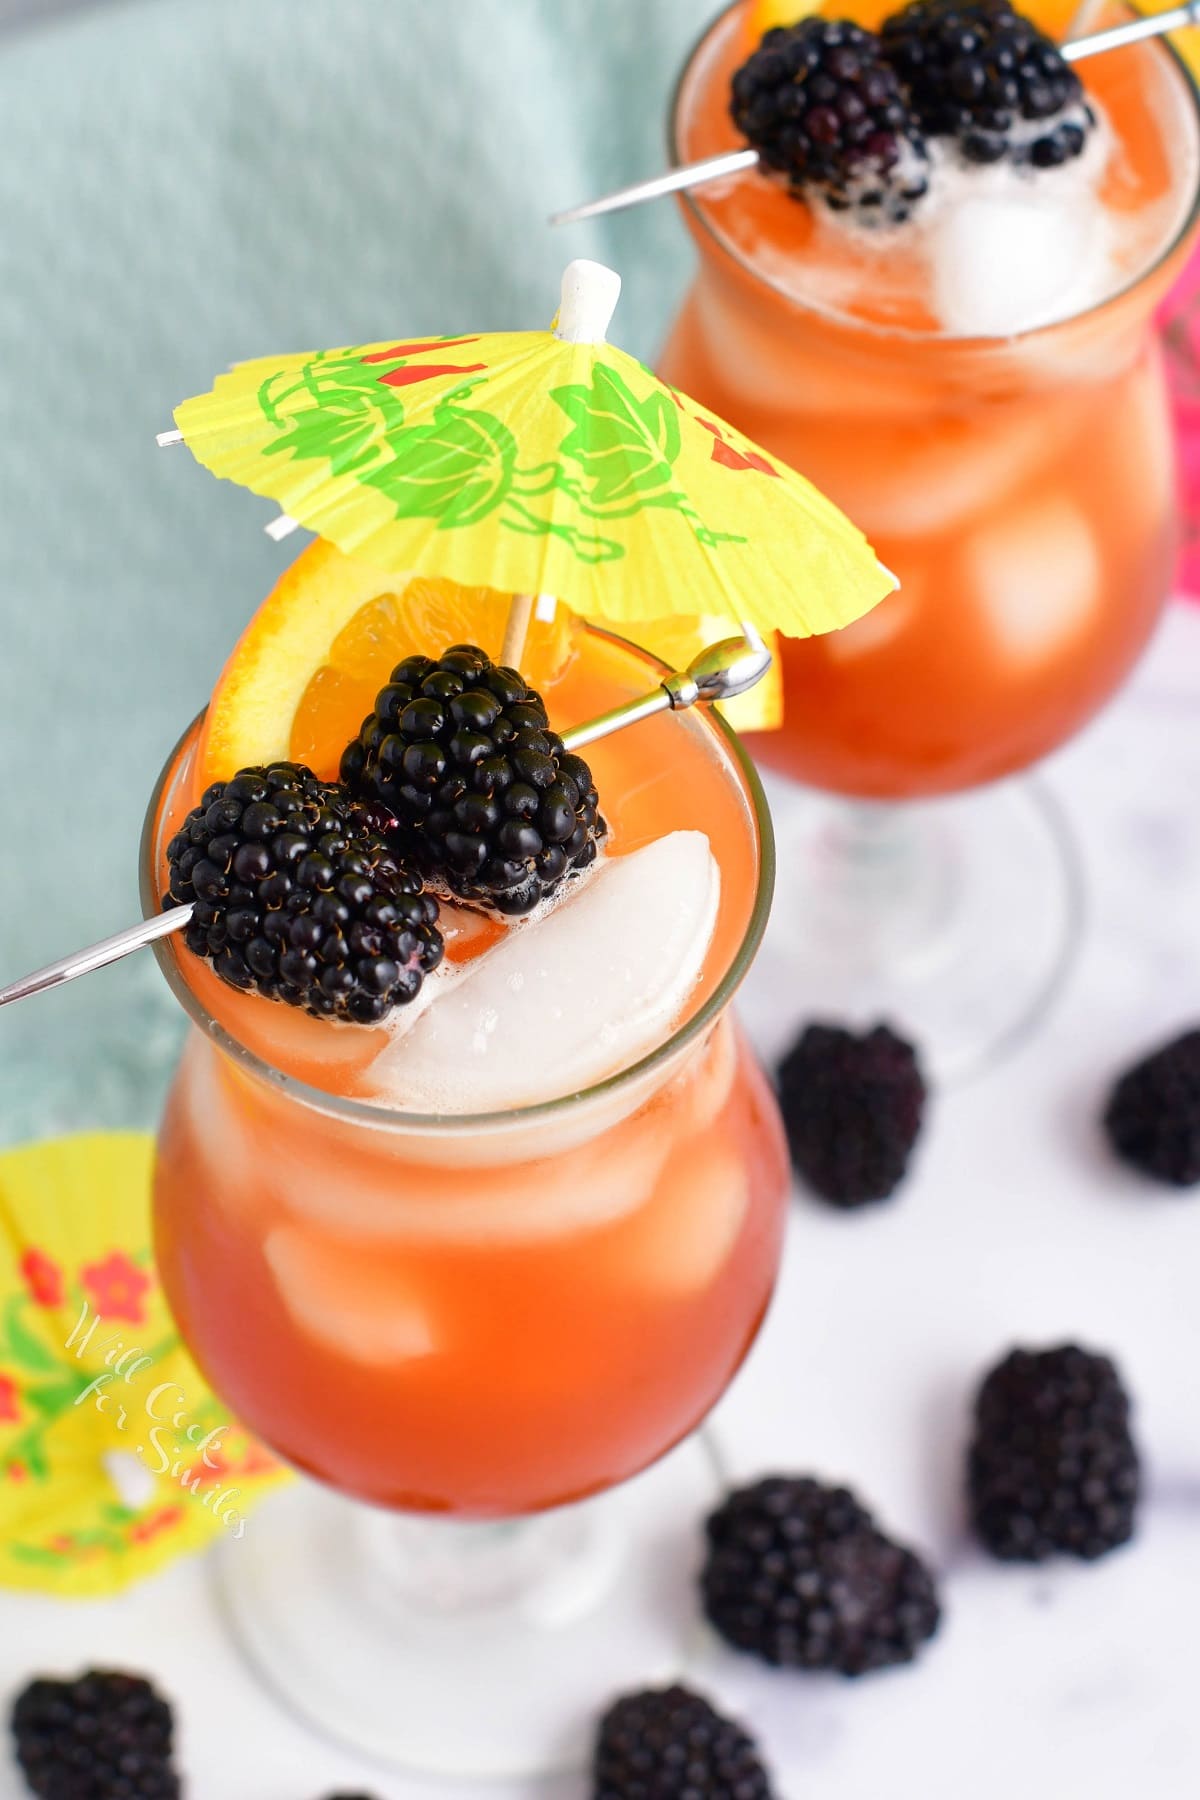 Two rum runners are in cocktail glasses and garnished with mini umbrellas and blackberries.